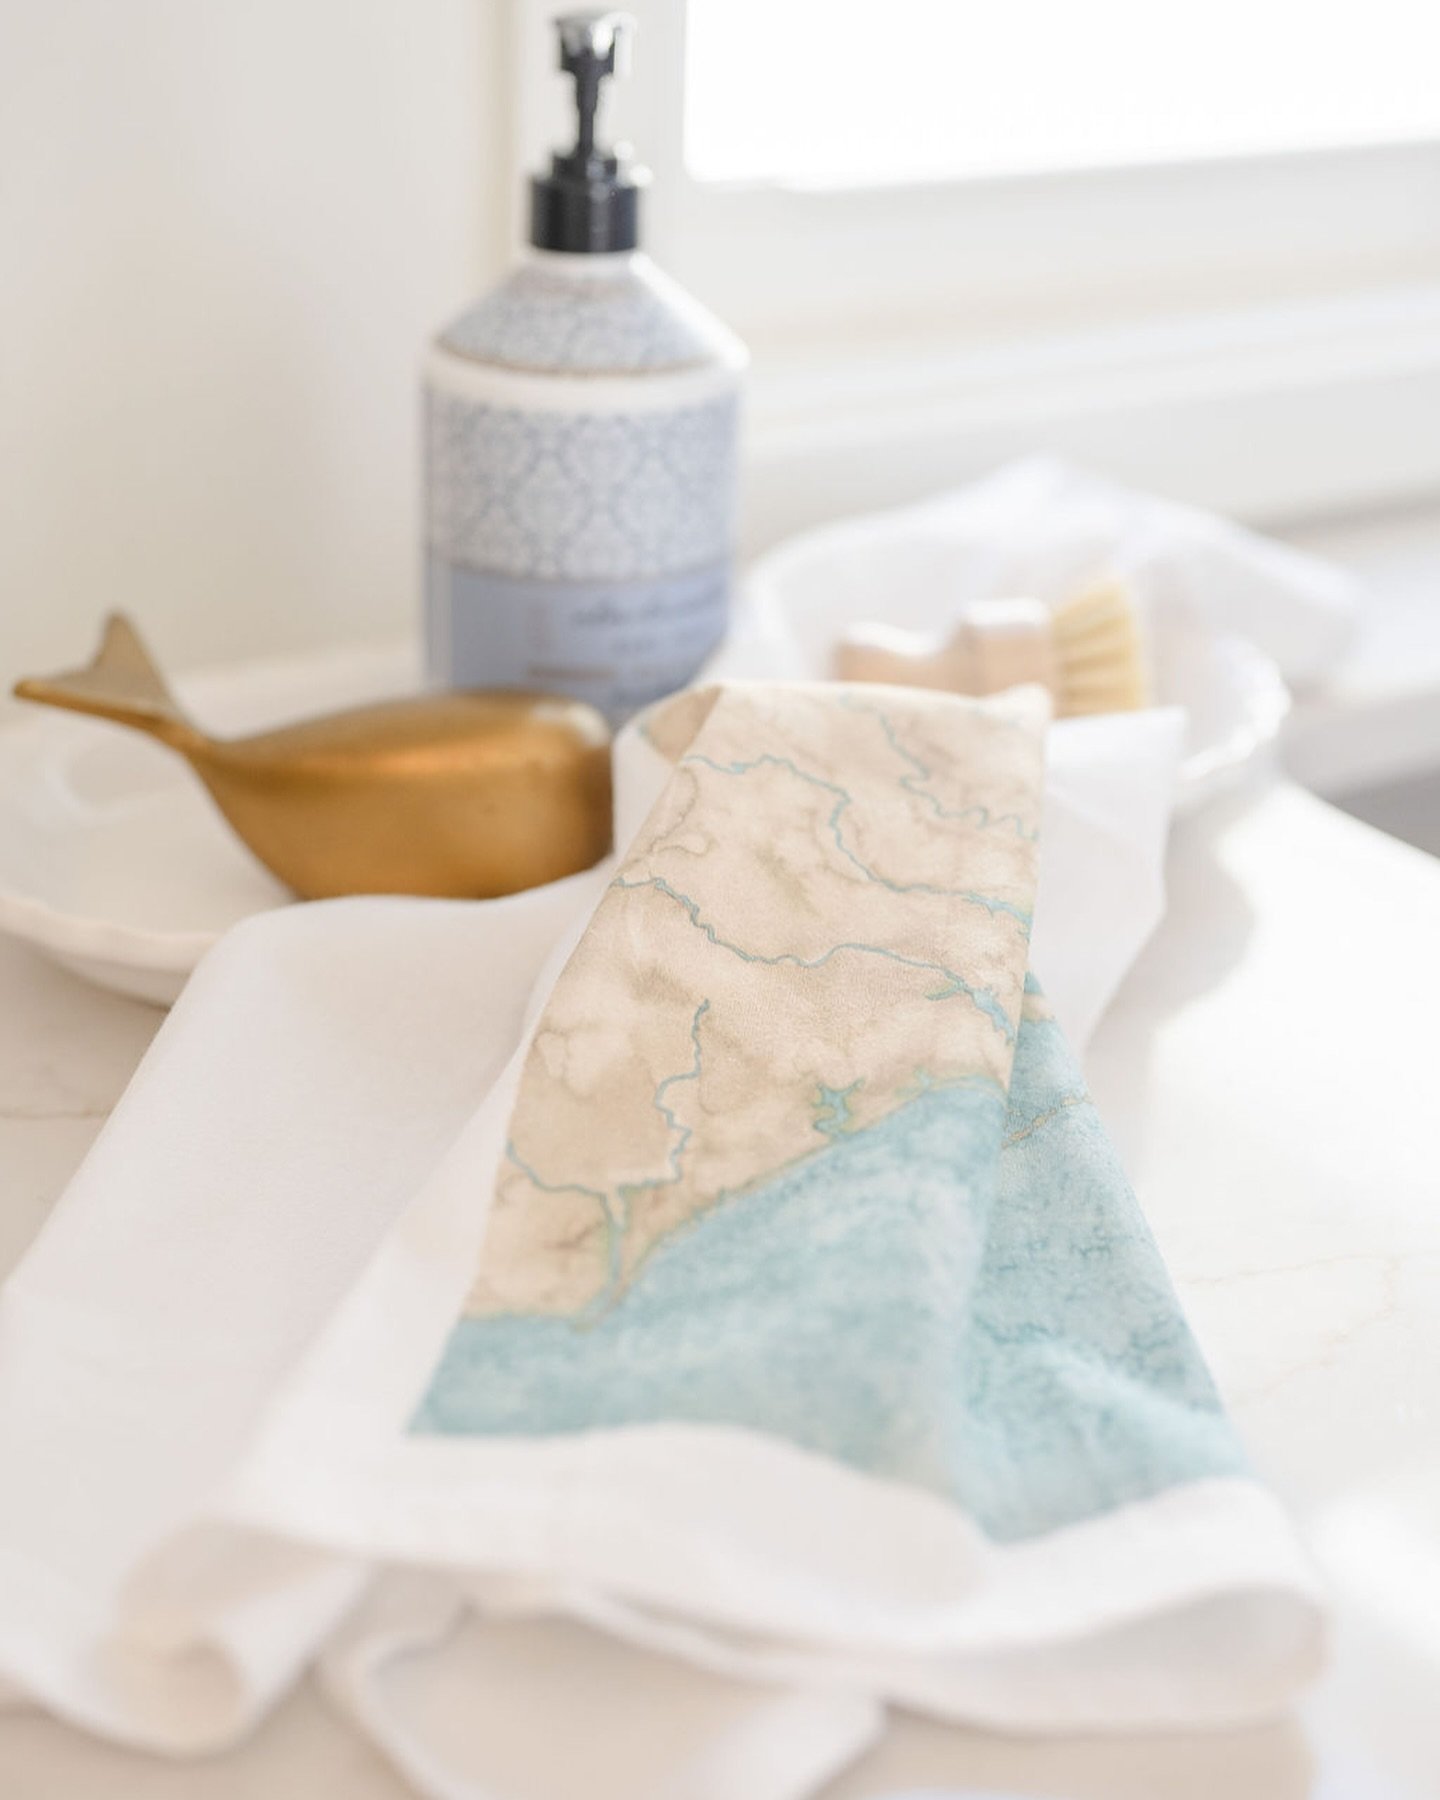 Back in stock! Our popular Coastal North Carolina tea towel is back in stock. We love map tea towels for an easy, casual way to bring coastal art into your home. Head to the link in profile for a quick click over to printedhues.com to grab yours. 

P